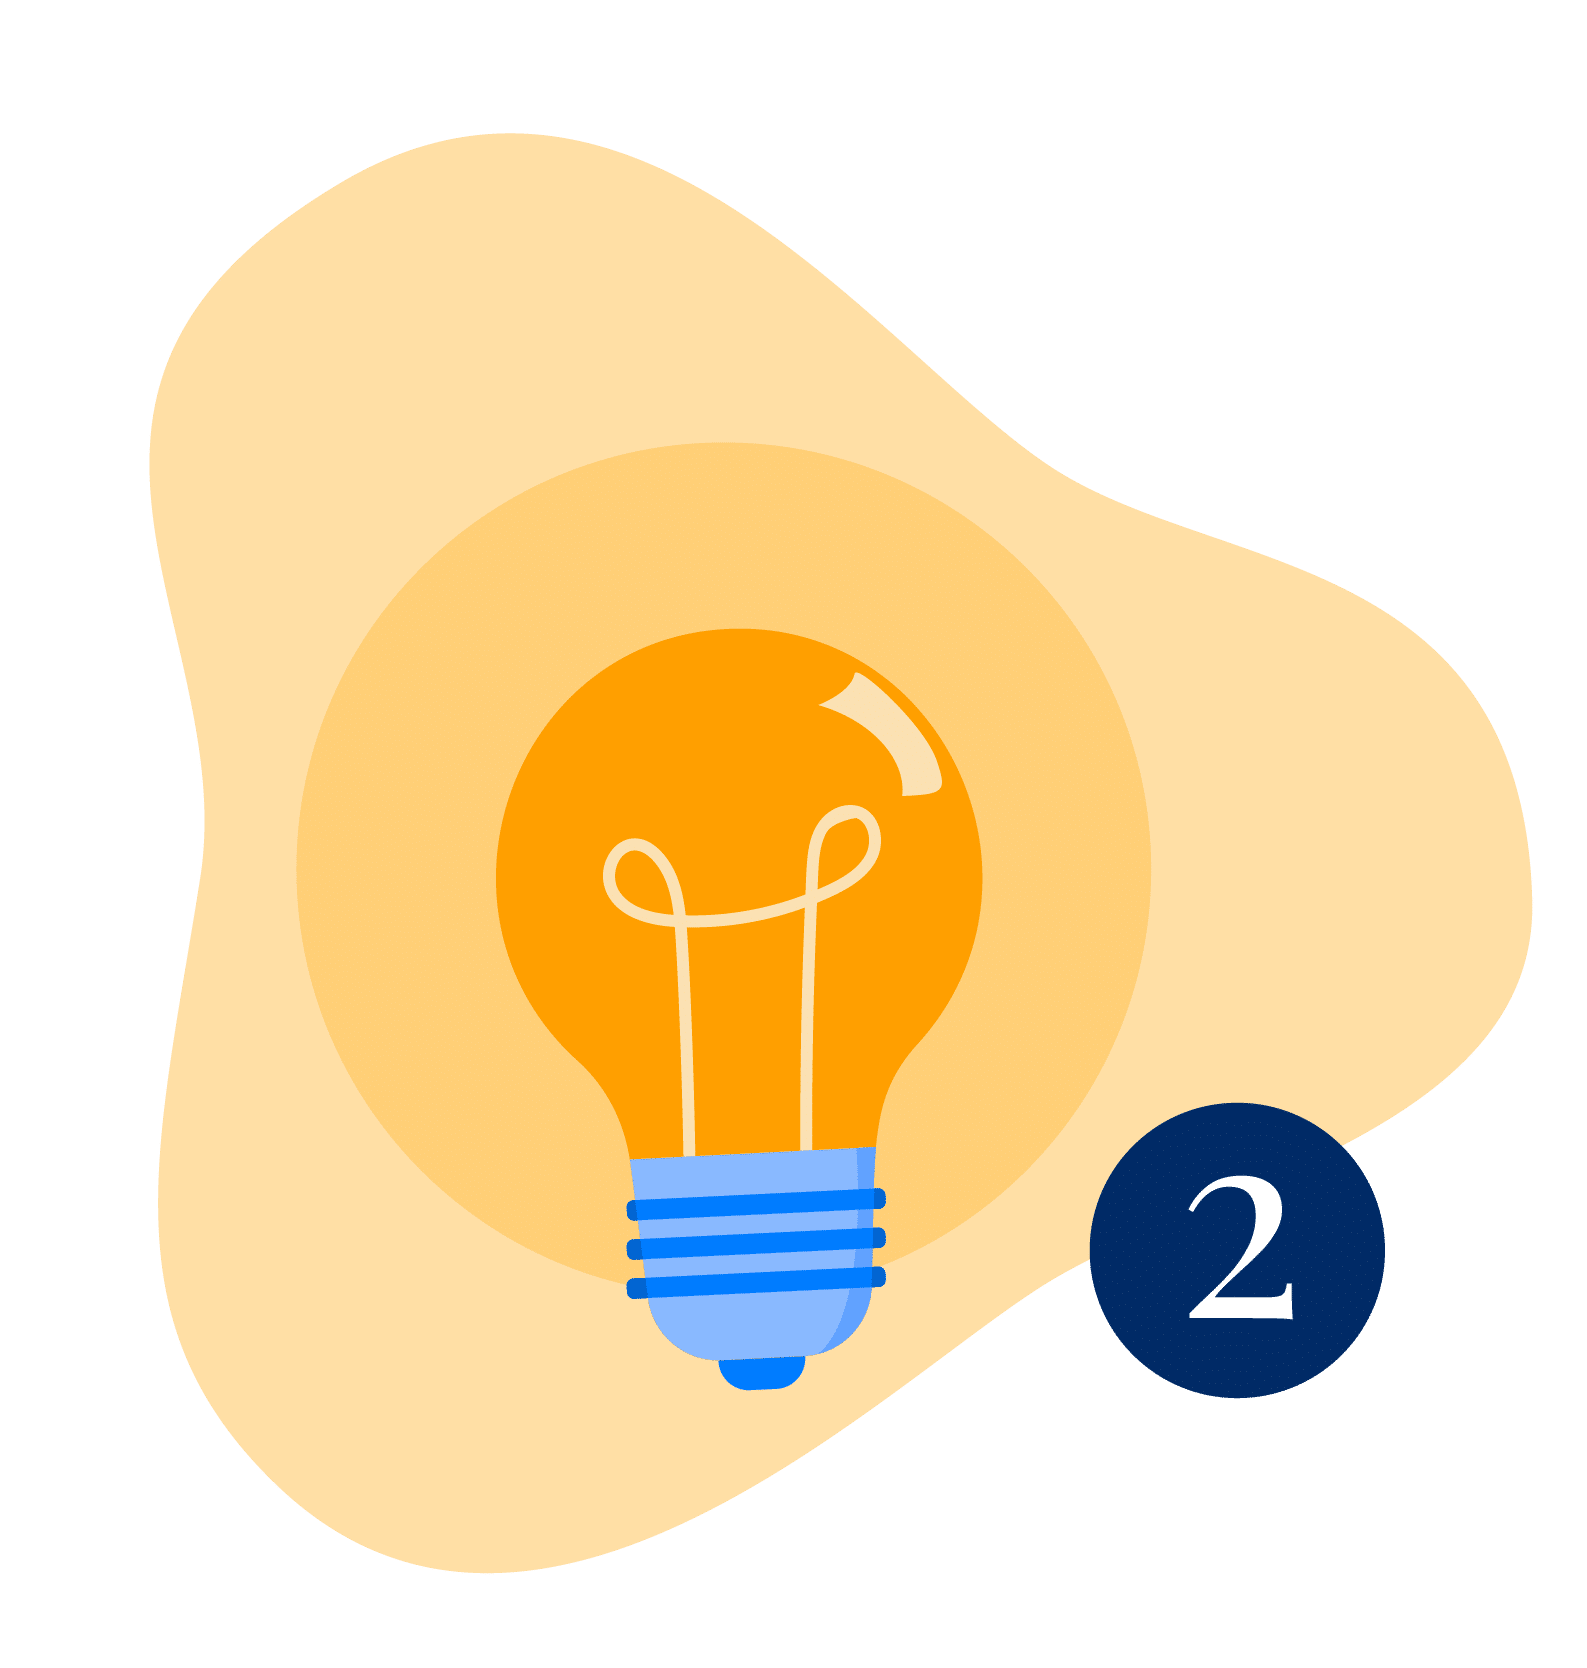 Build your knowledge base, Illustration of a lightbulb